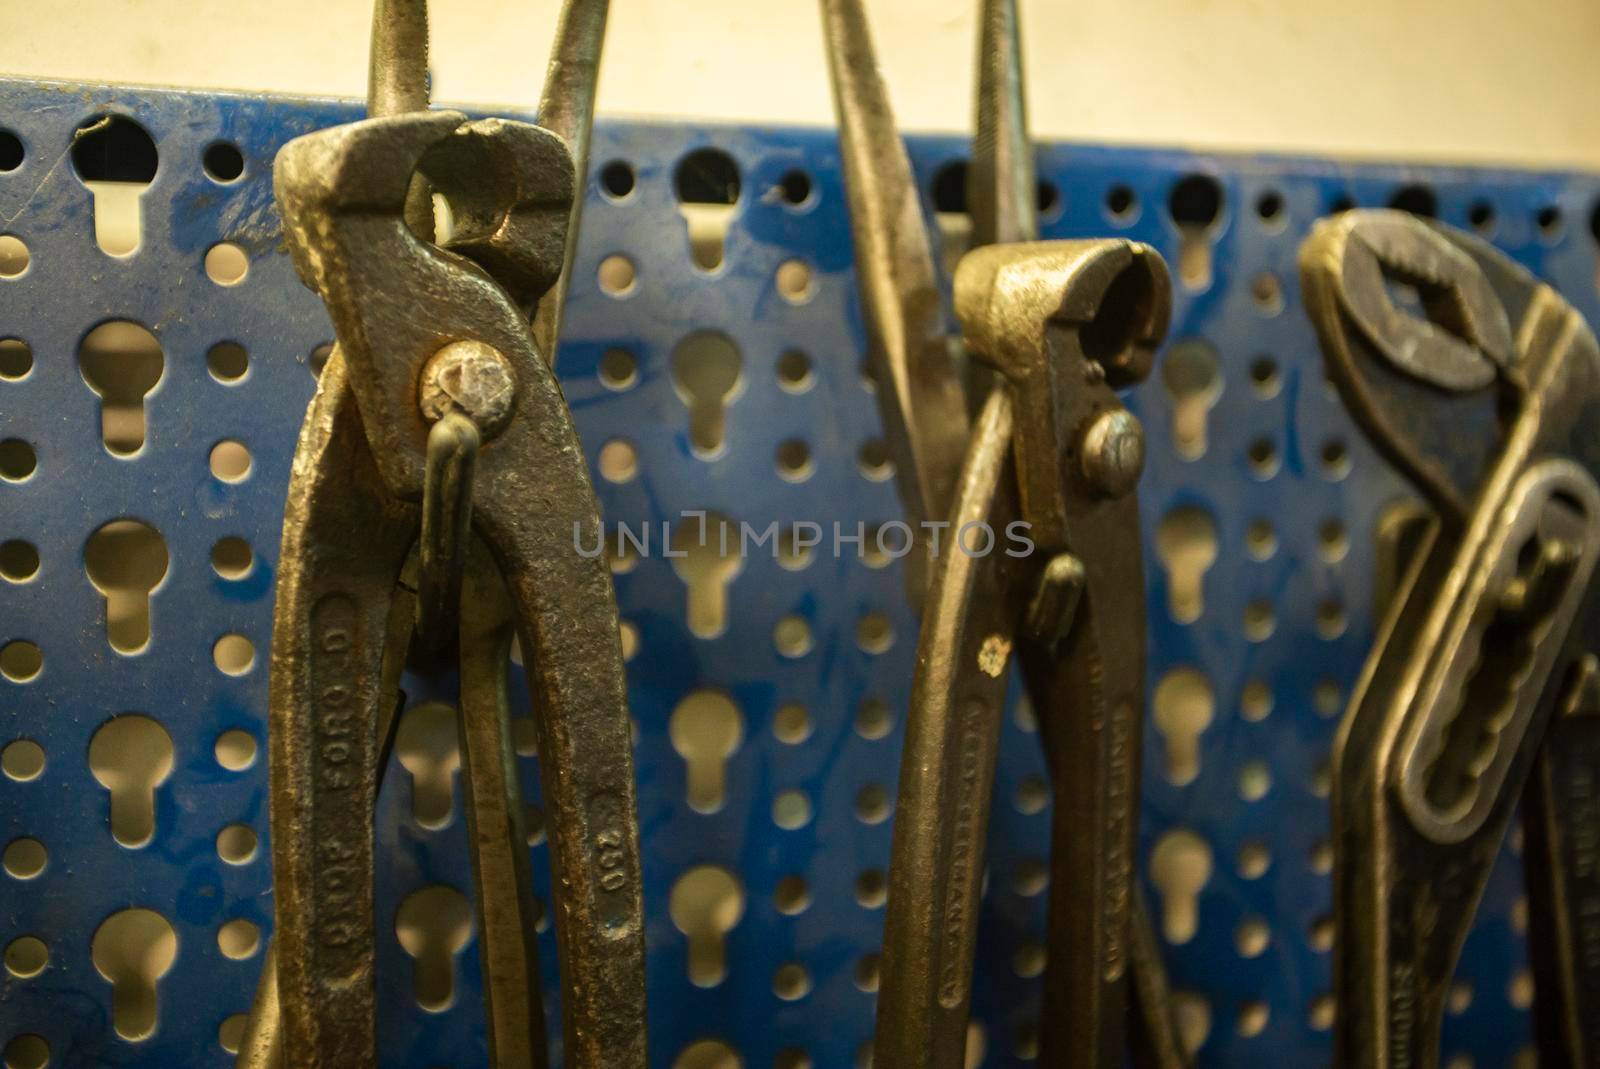 Tools hanging in the workshop by pippocarlot